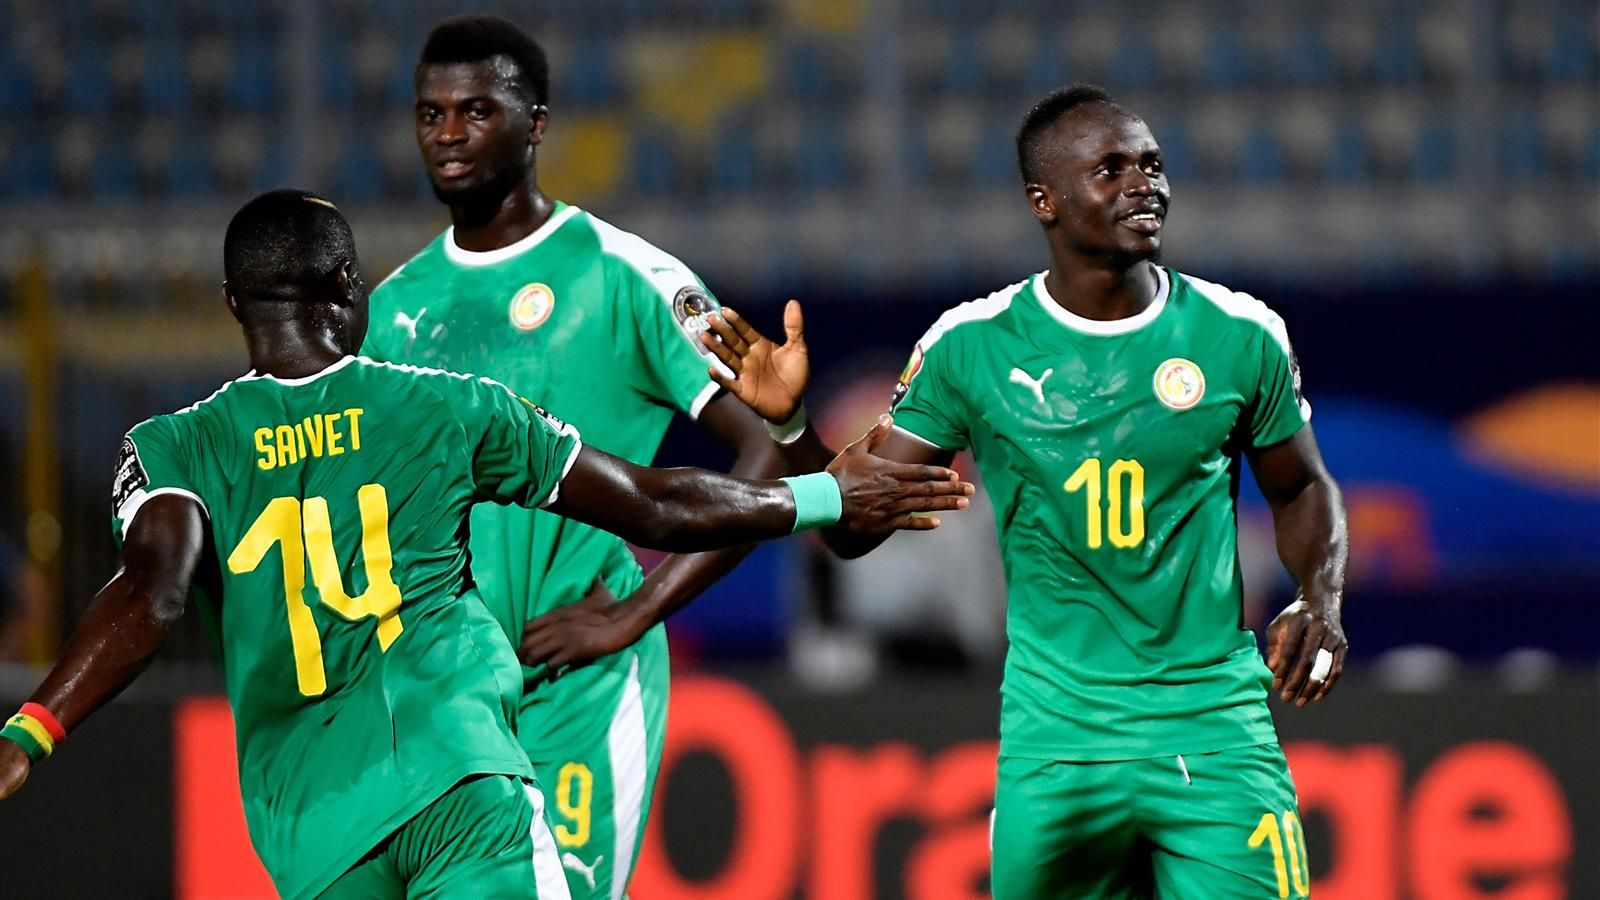 Sadio Mane and a goal from Ismaila Sarr was all Senegal needed to beat Kenya in their Group C